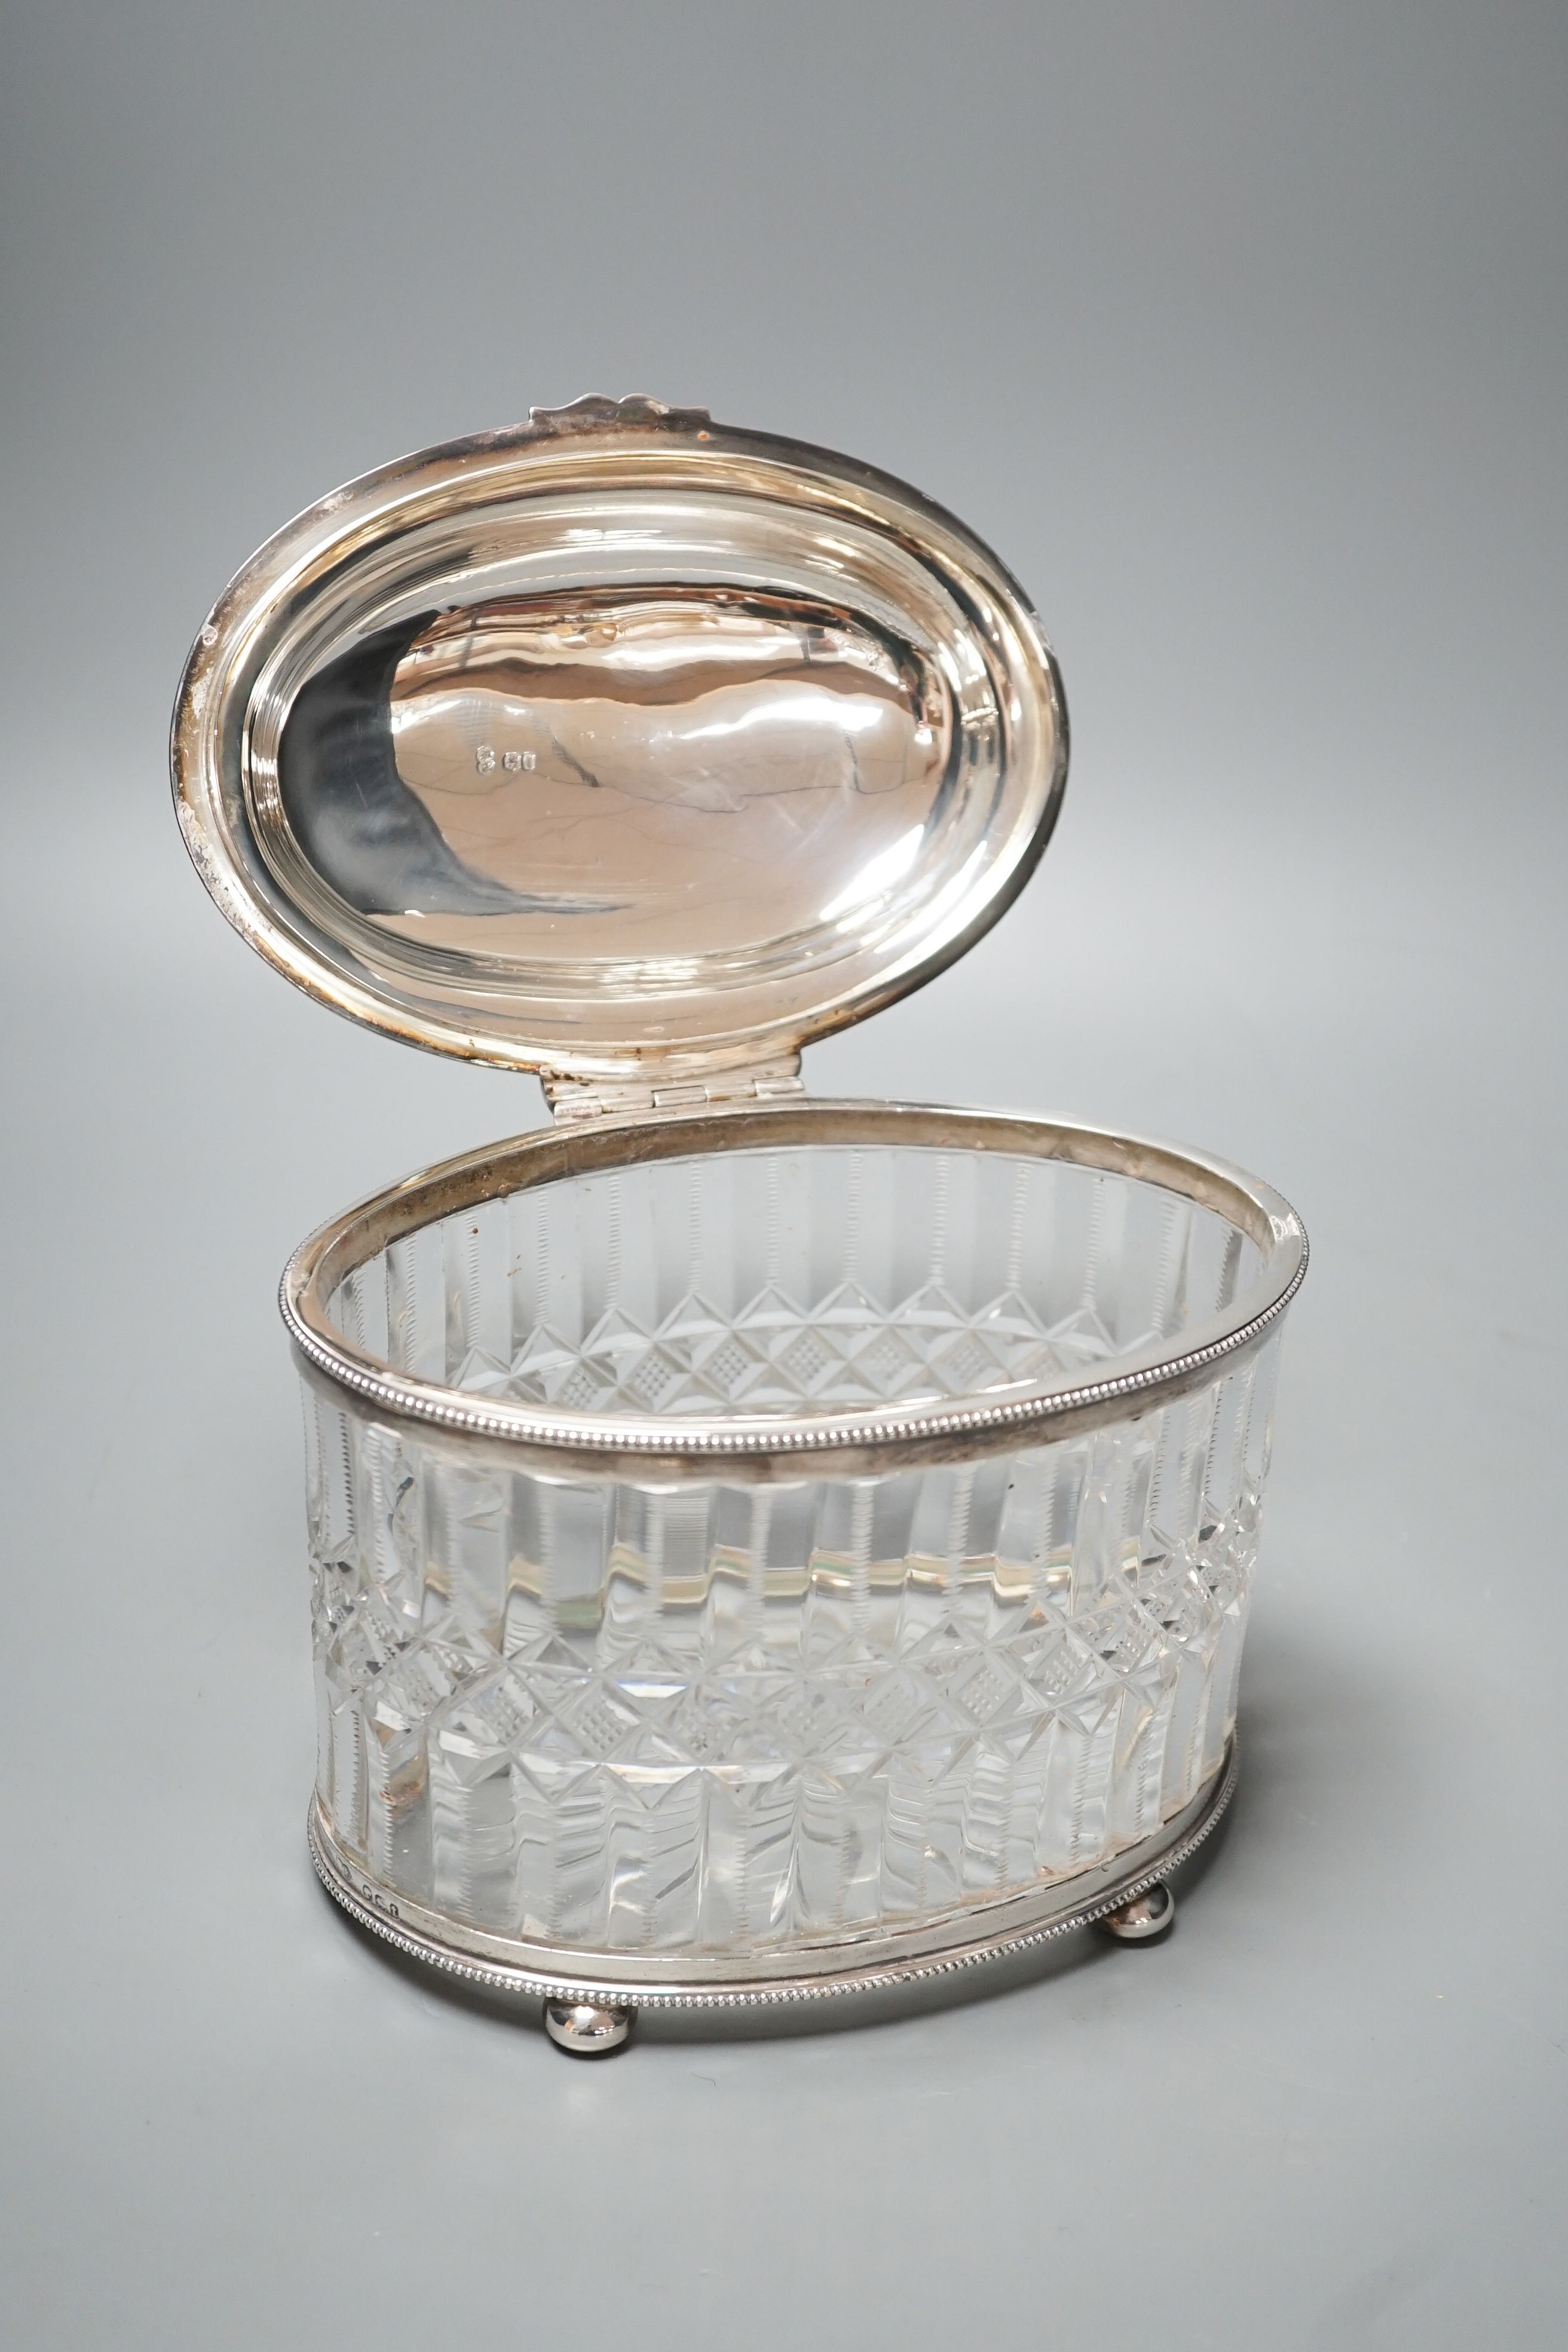 A Victorian engraved silver mounted cut glass oval biscuit barrel, double stamped maker's mark, London, 1874, height 15.5cm.